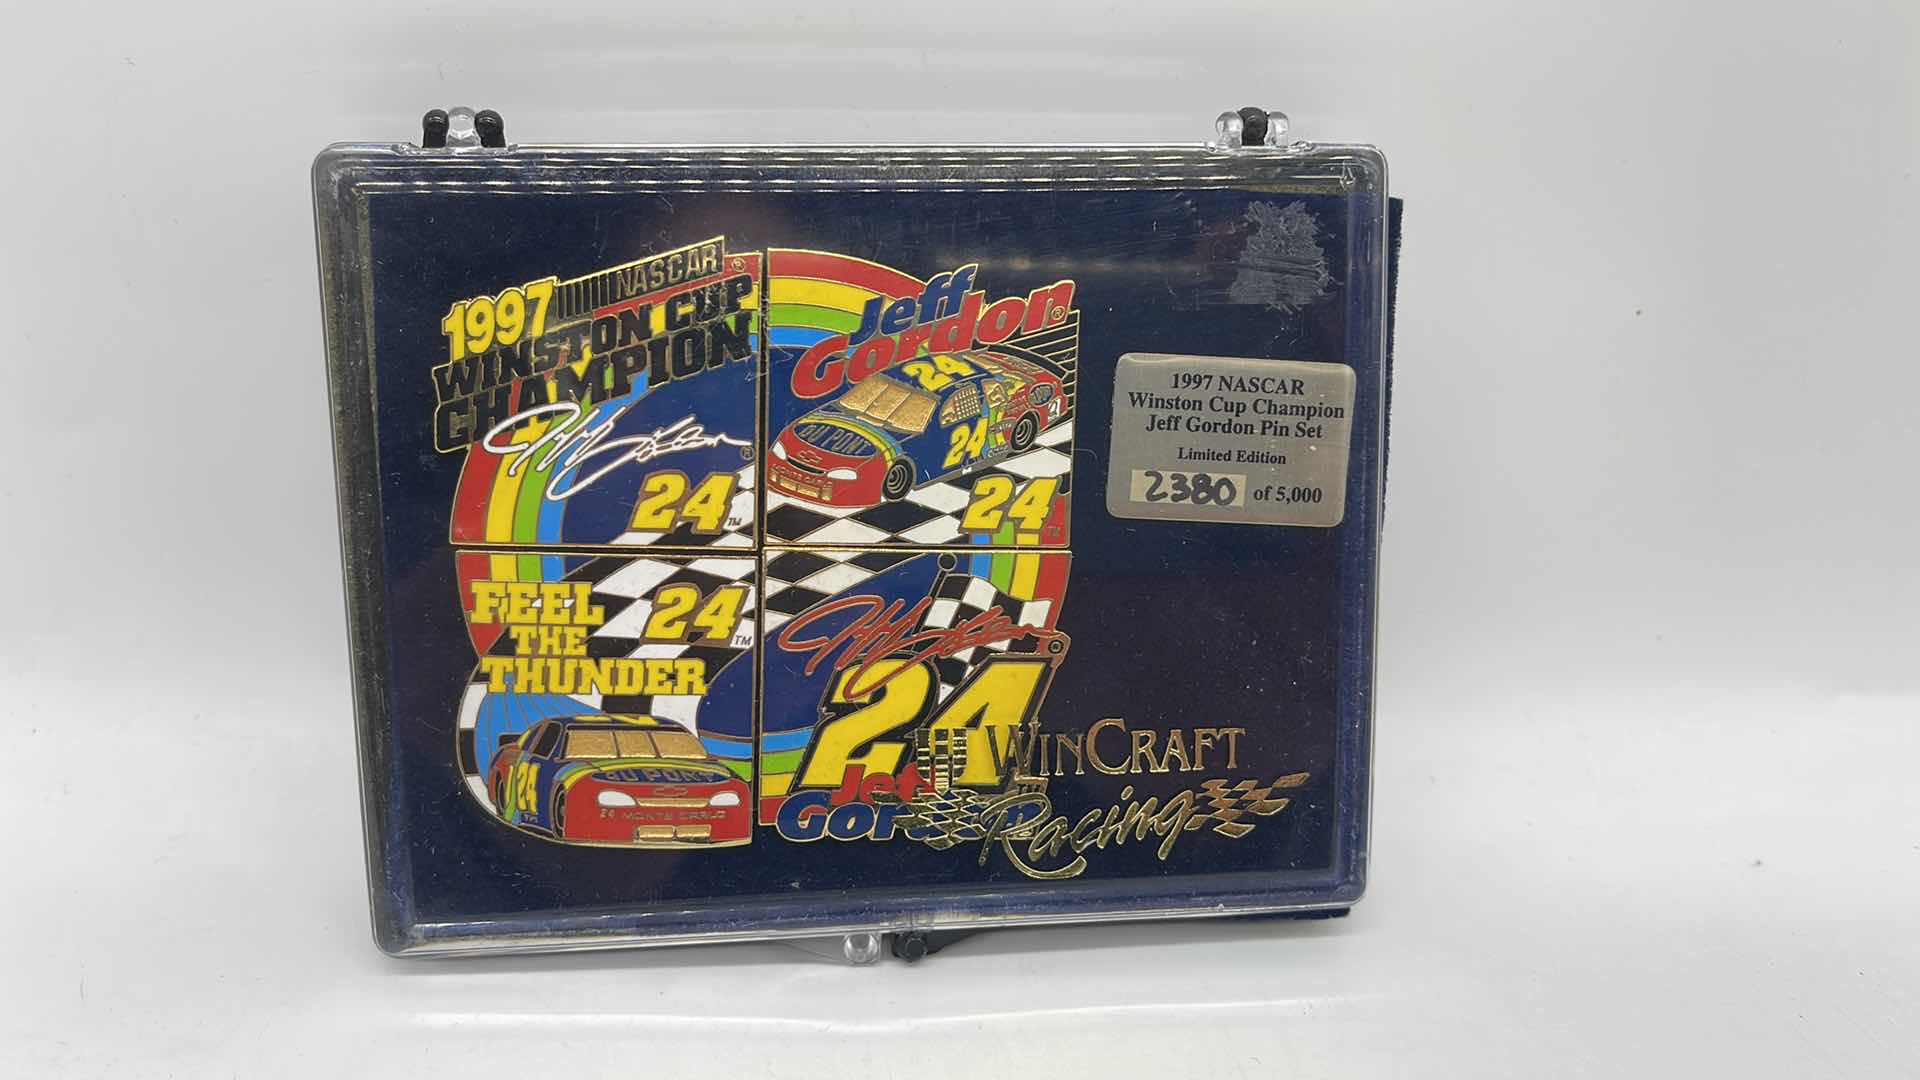 Photo 1 of 1997JEFF GORDON WINSTON CUP CHAMPION LIMITED EDITION ENAMEL PIN SET NUMBERED 2380/5000